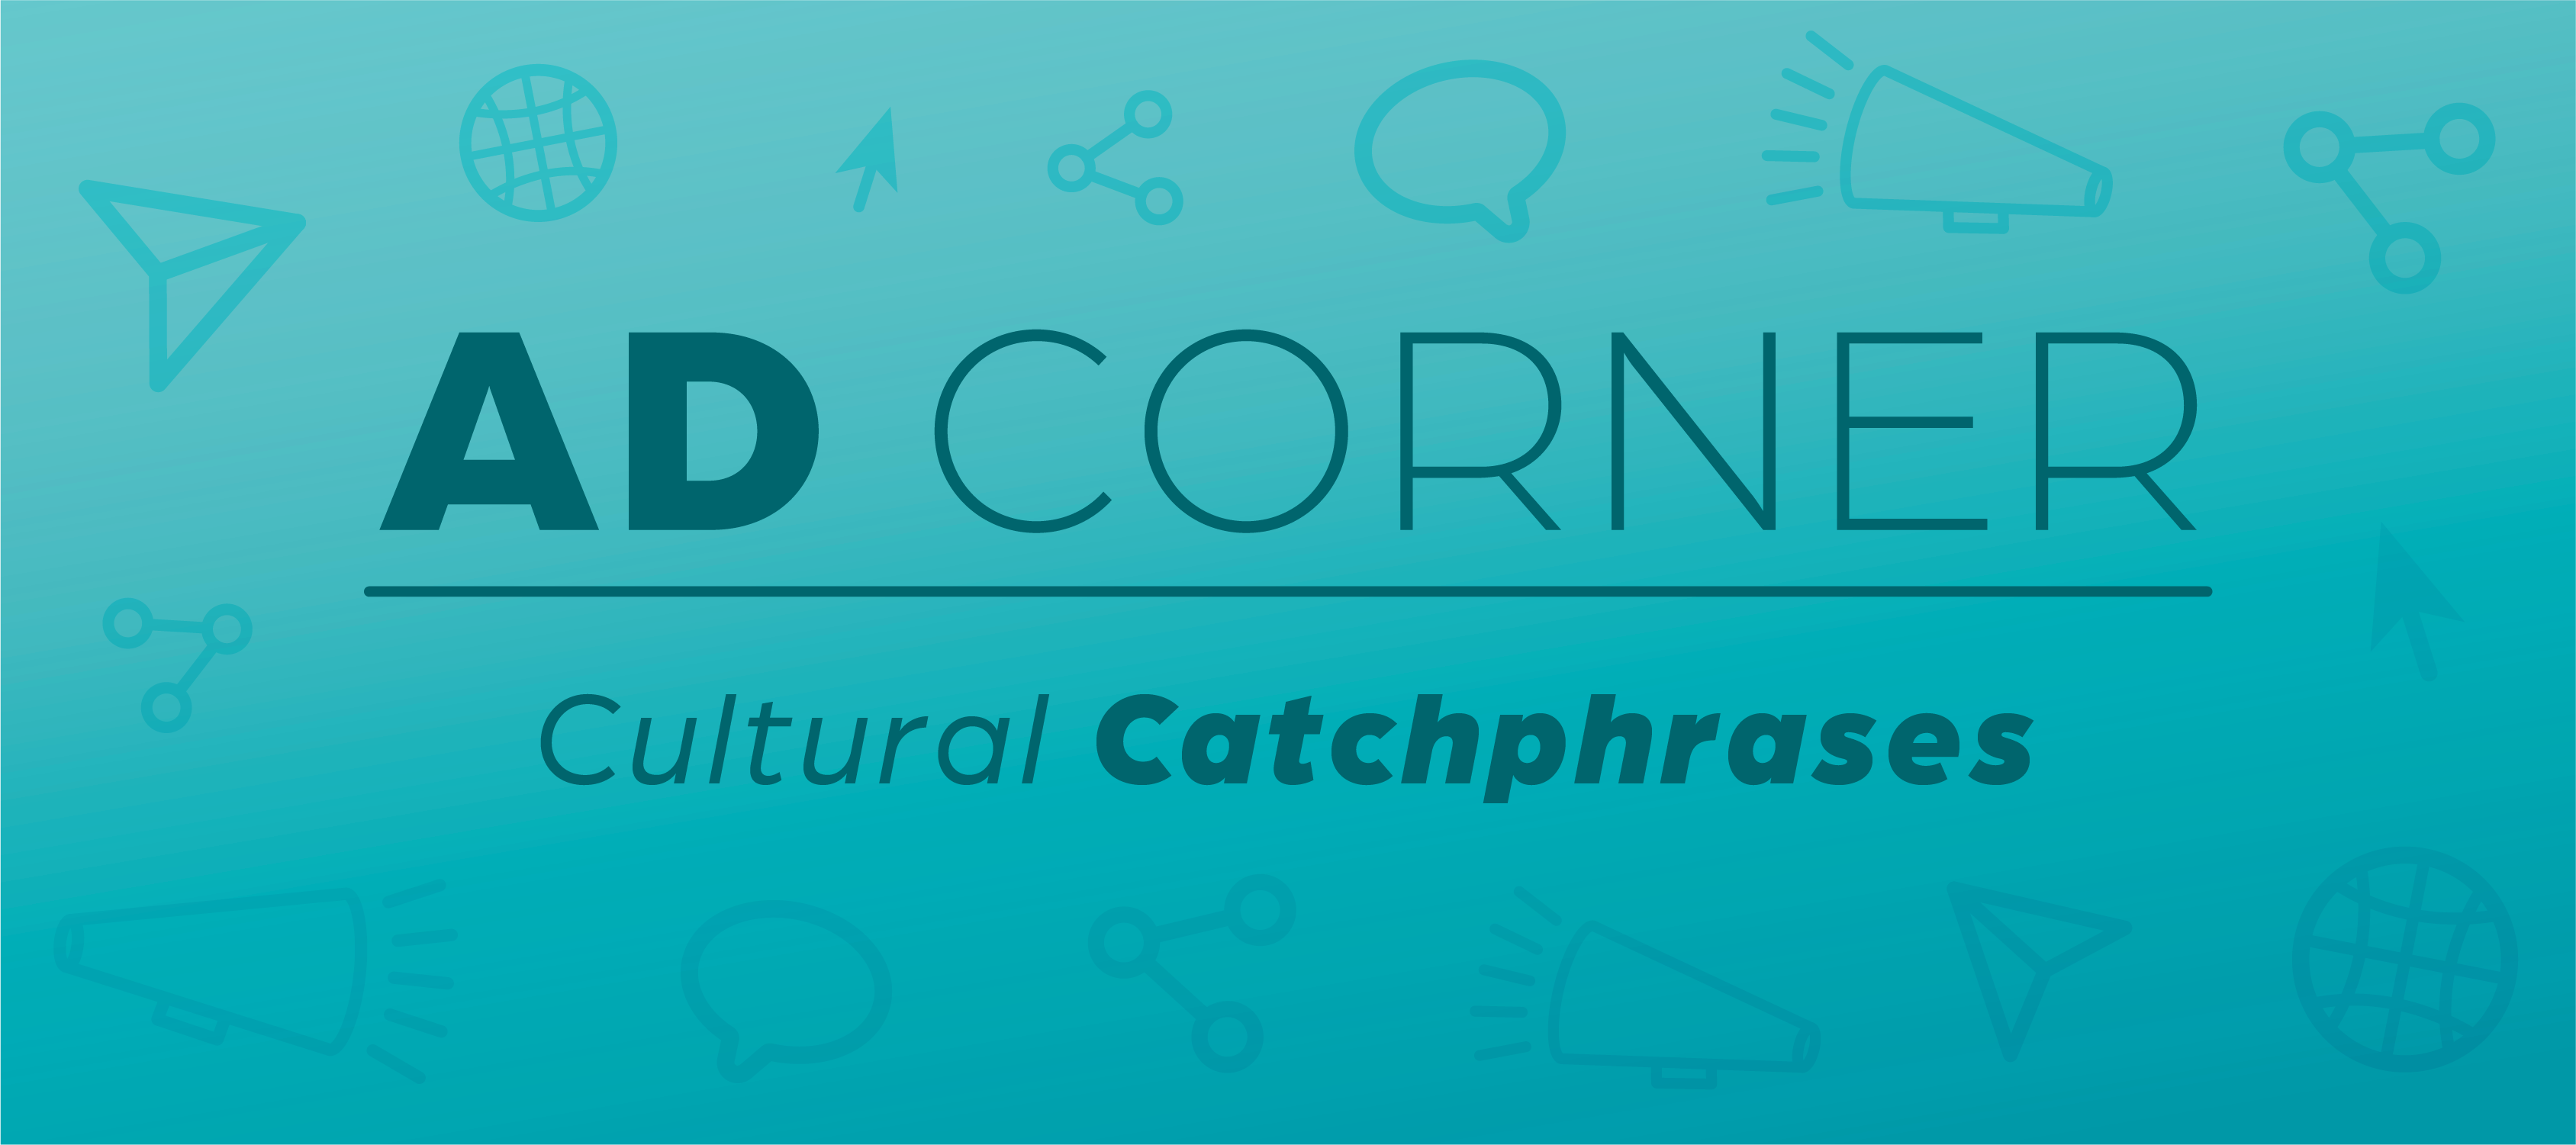 Header image that says "Ad Corner: Cultural Catchphrases" surrounded by marketing icons